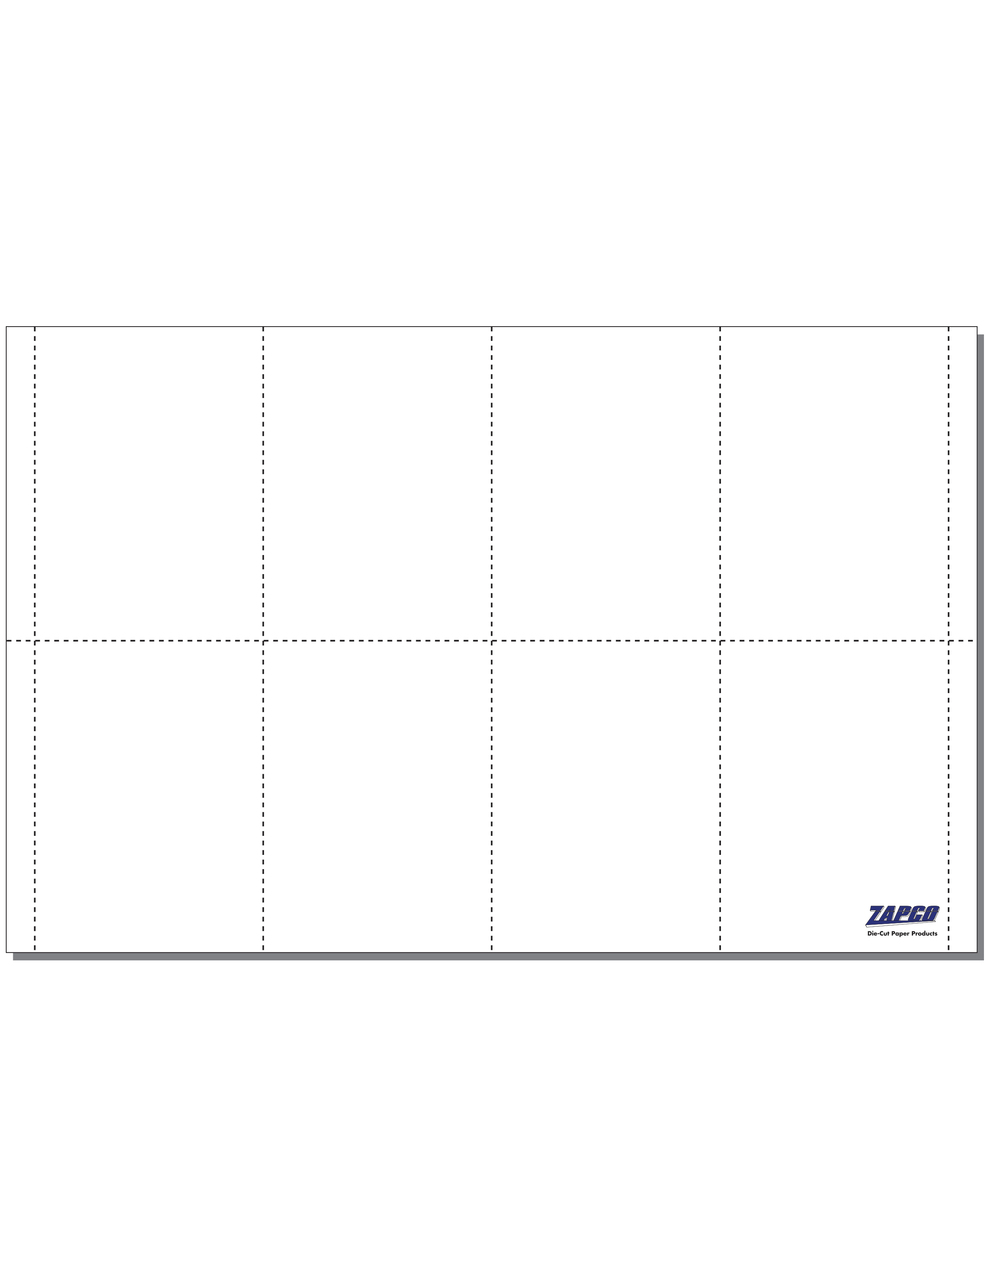 Item 630: 8-up 4" x 5 1/2" Post Cards 11" x 17" Sheet(250 Sheets)